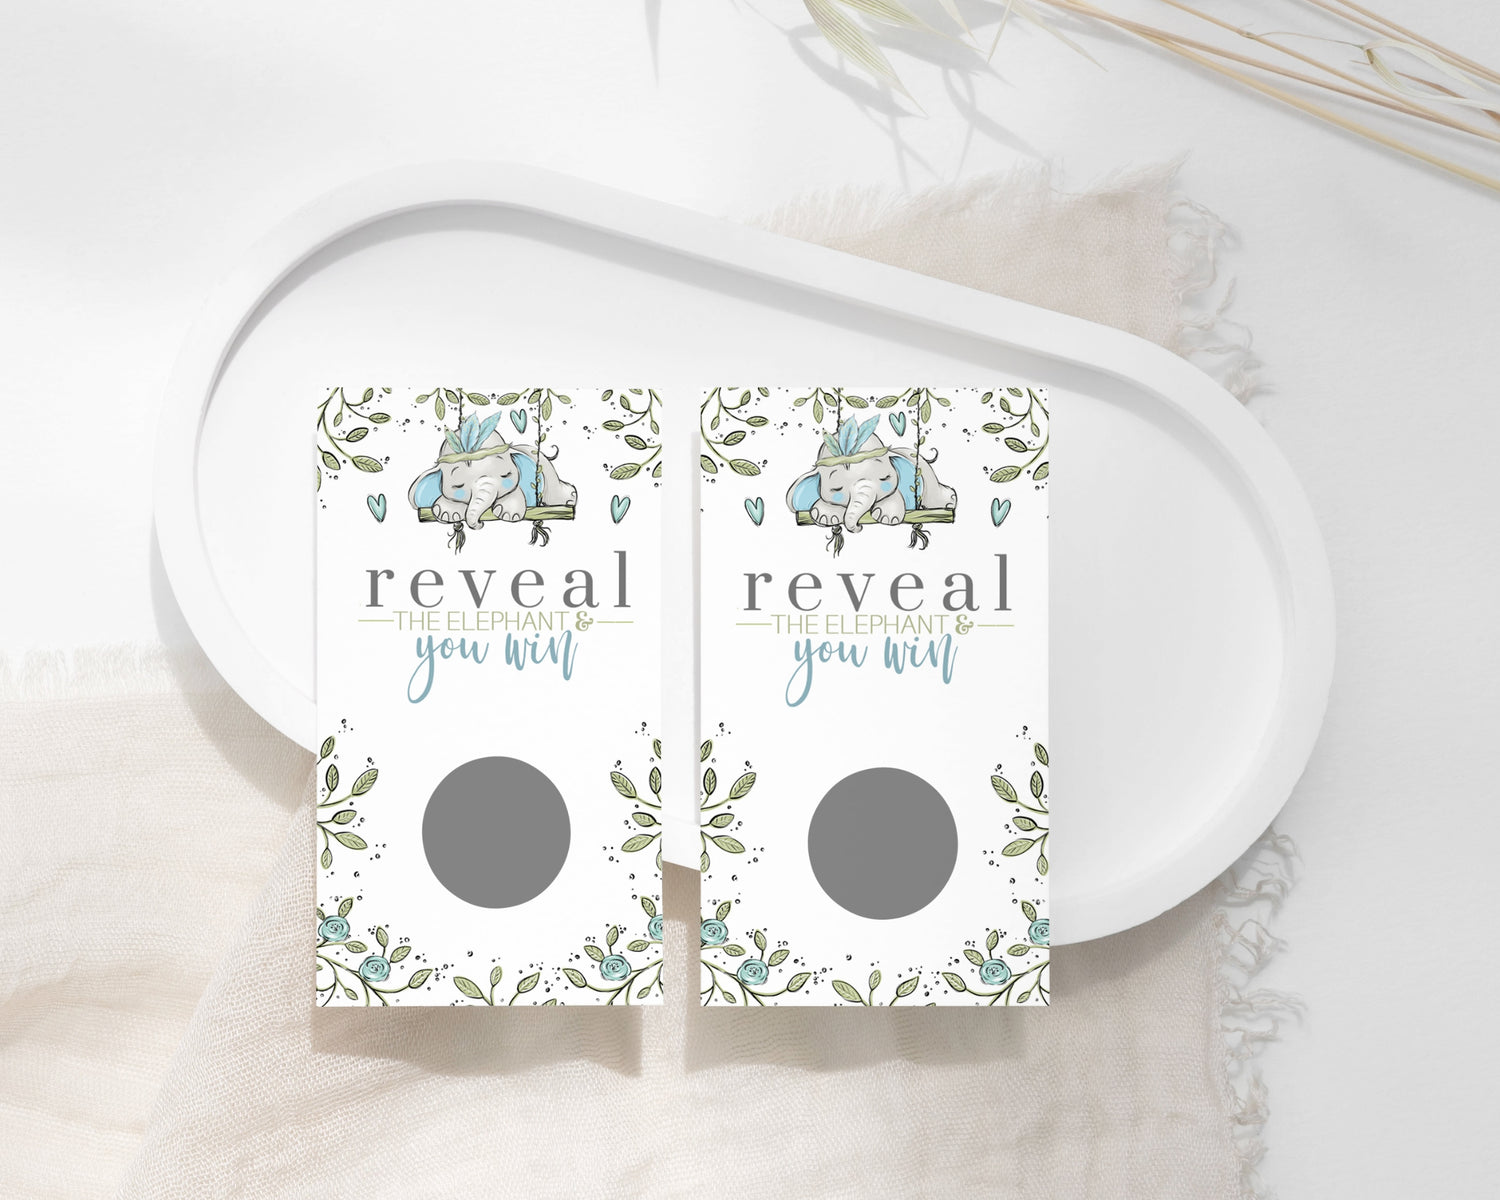 Welcome your little one with our serene greenery and elephant baby shower theme in soothing blue. Our collection includes elegant invitations, heartfelt thank you cards, and delightful games, perfect for celebrating your boy’s upcoming arrival.